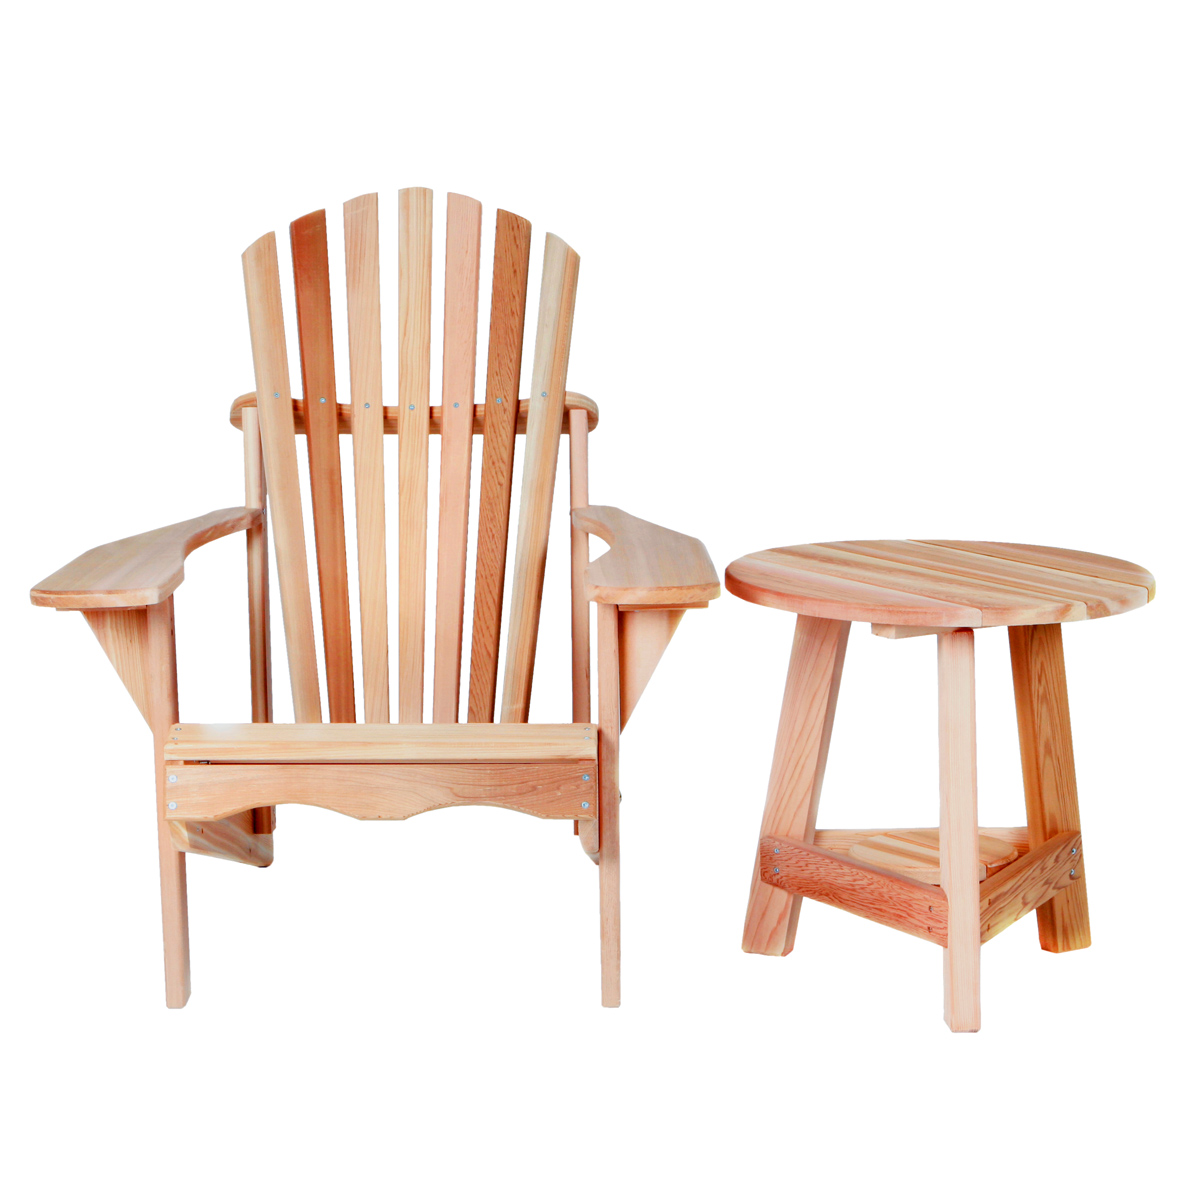 Image of All Things Cedar 2pc Clear Western Red Cedar Tripod Table and Adirondack Chair Set